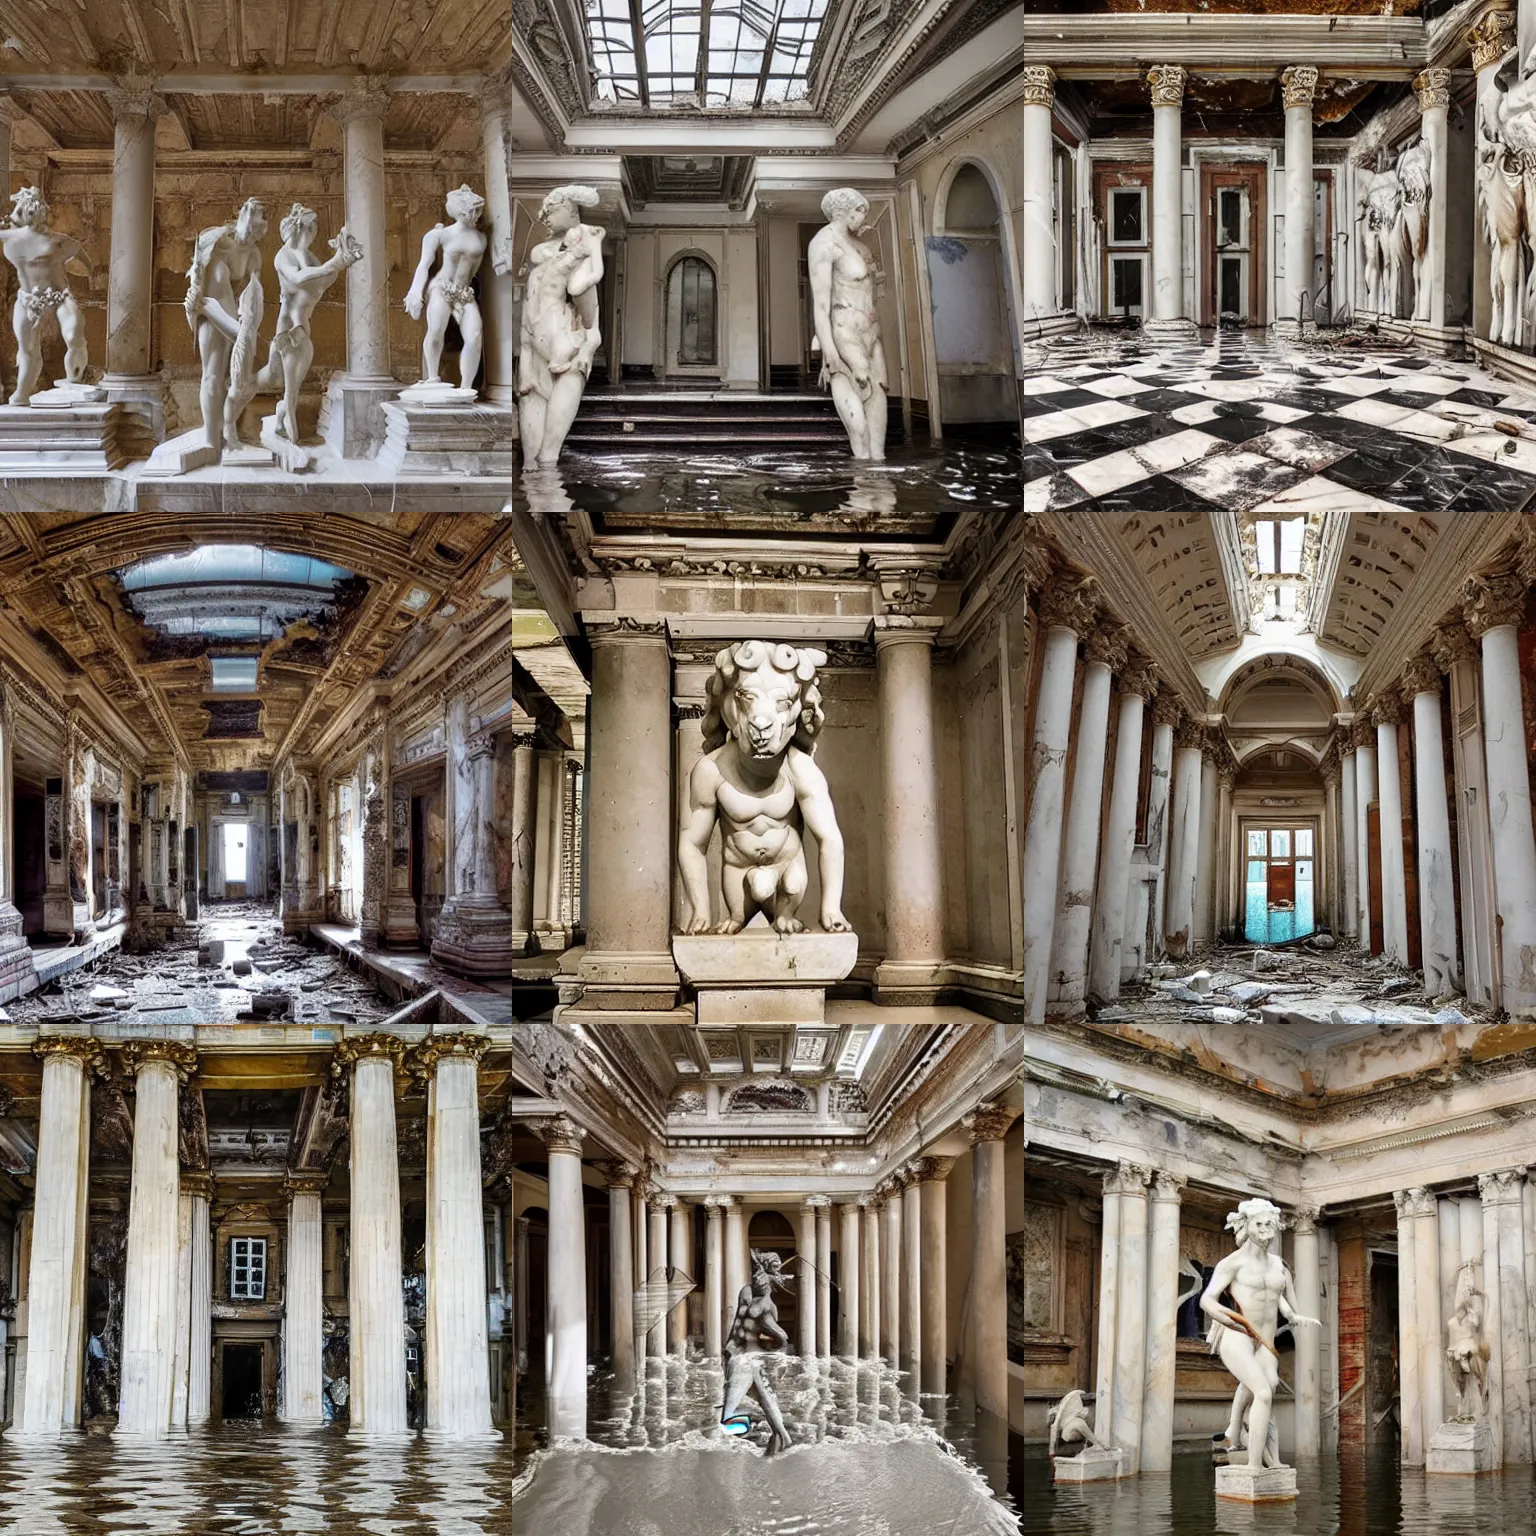 Prompt: photo piranessi symmetry flooded connected neoclassic halls and beautiful human statues myriad of huge marble staircases minotaur gods pelicans helenistic classic statues sculptures decrepit derelict abandoned flooded water damage - t